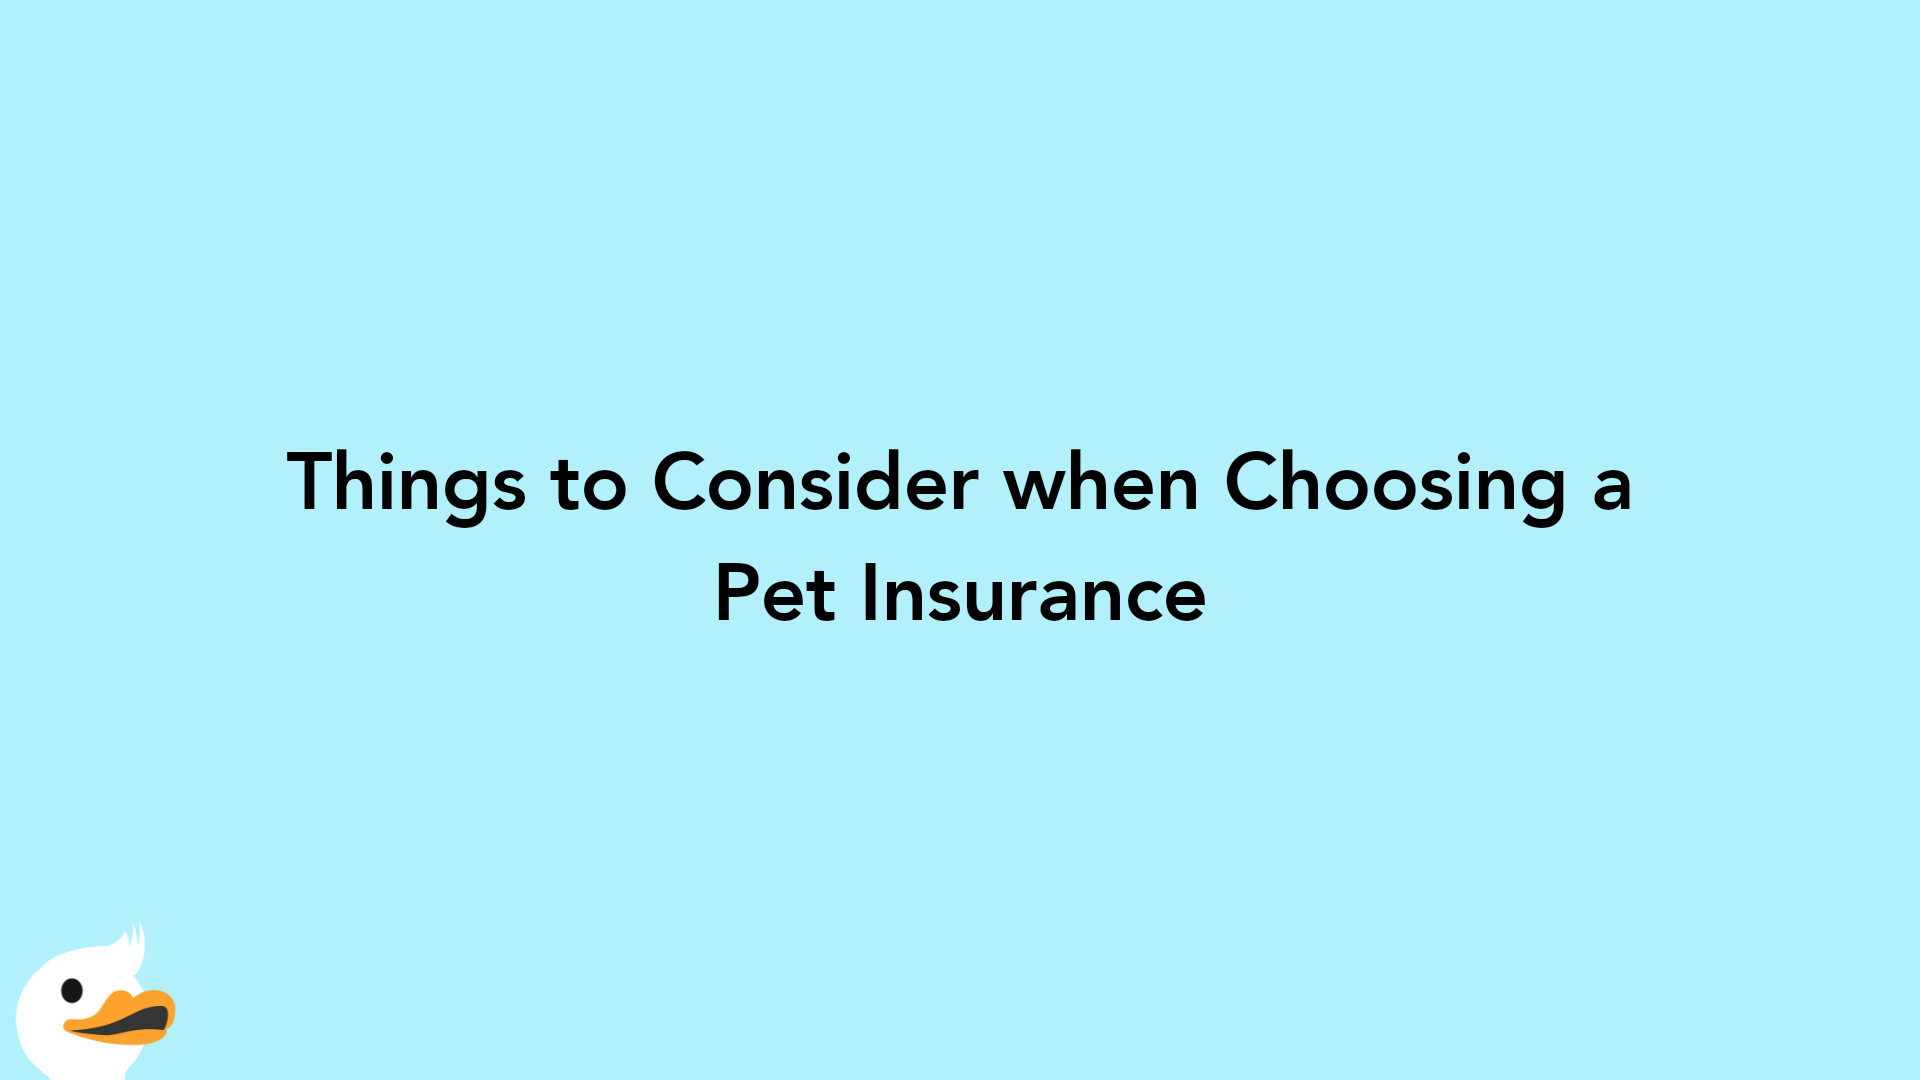 Things to Consider when Choosing a Pet Insurance